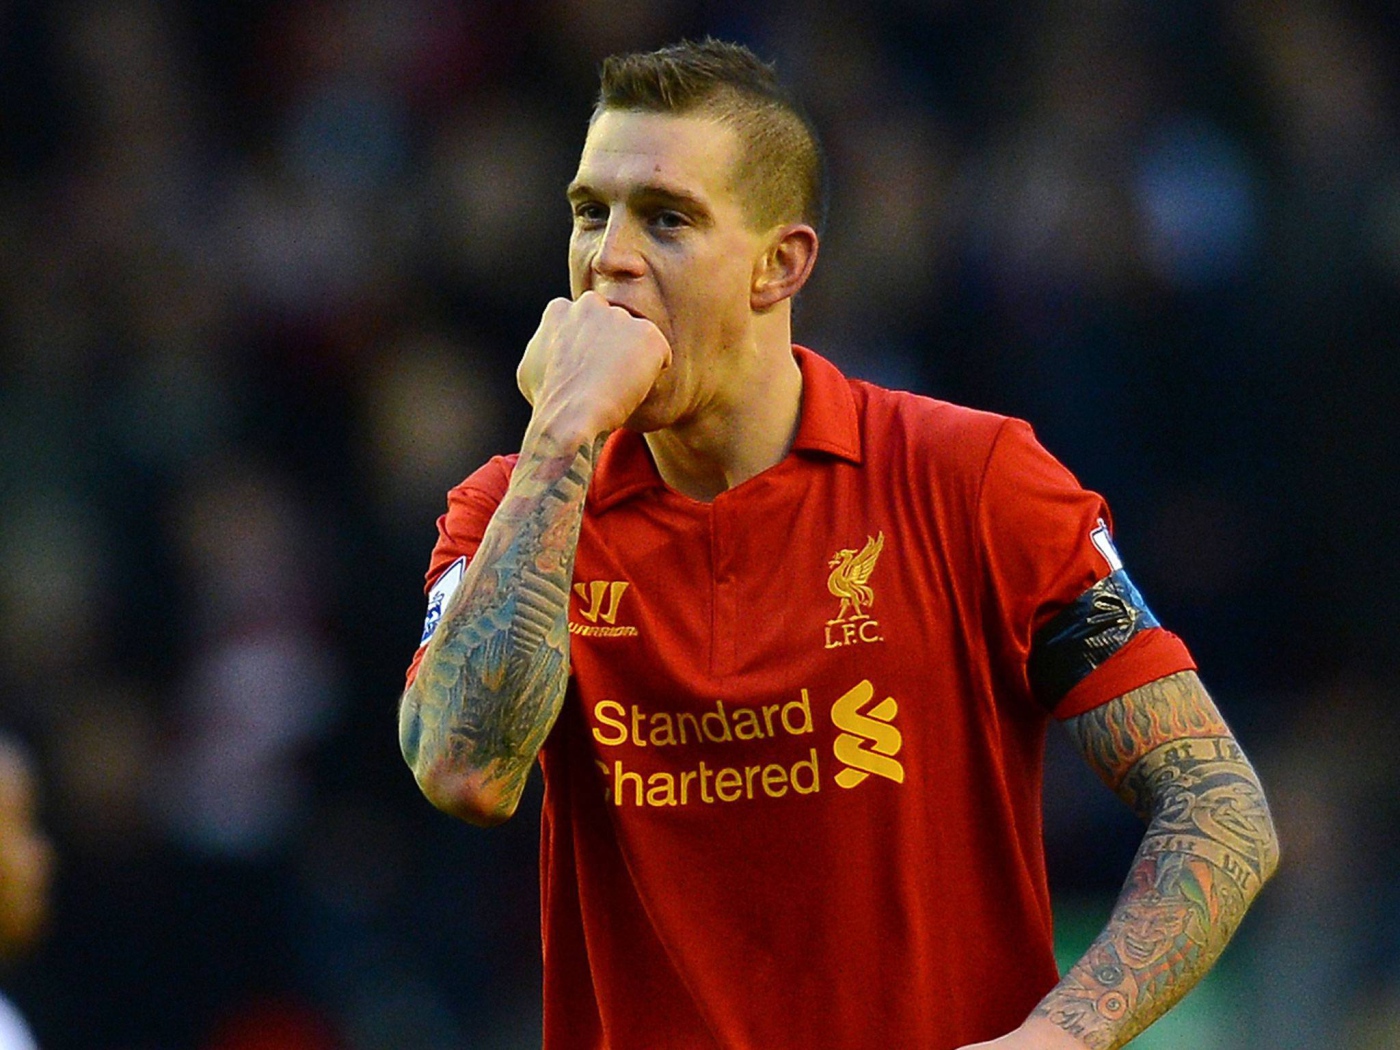 The player of Liverpool Daniel Agger is biting his fist